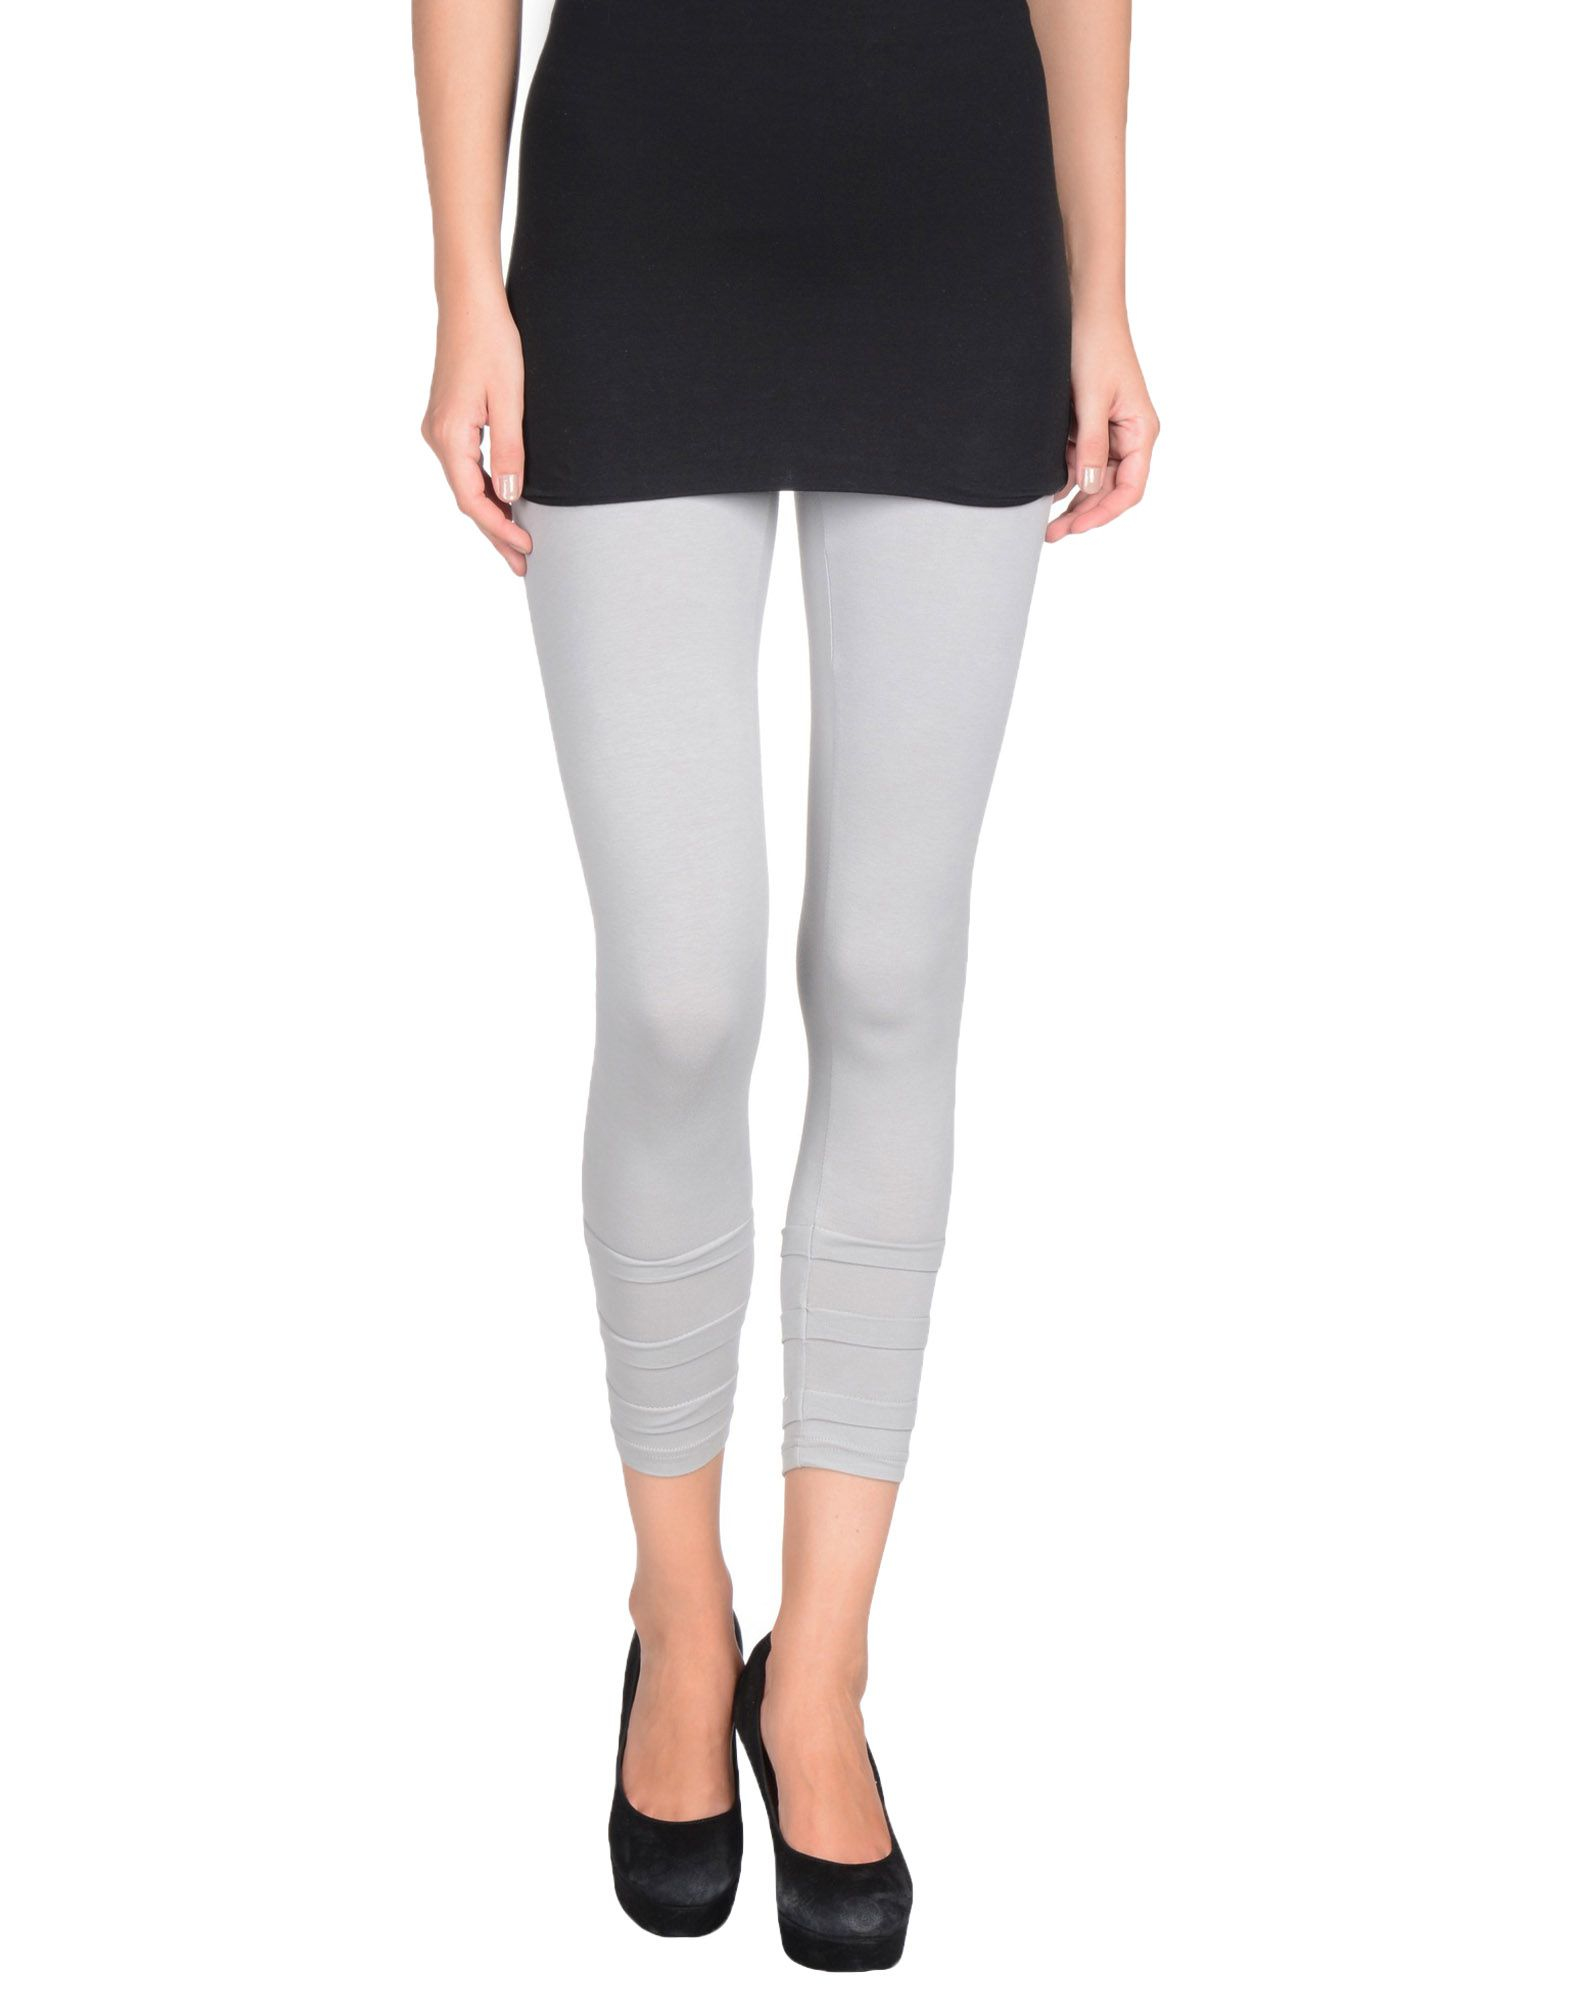 Outlet light grey leggings for women pictures without walmart with tights